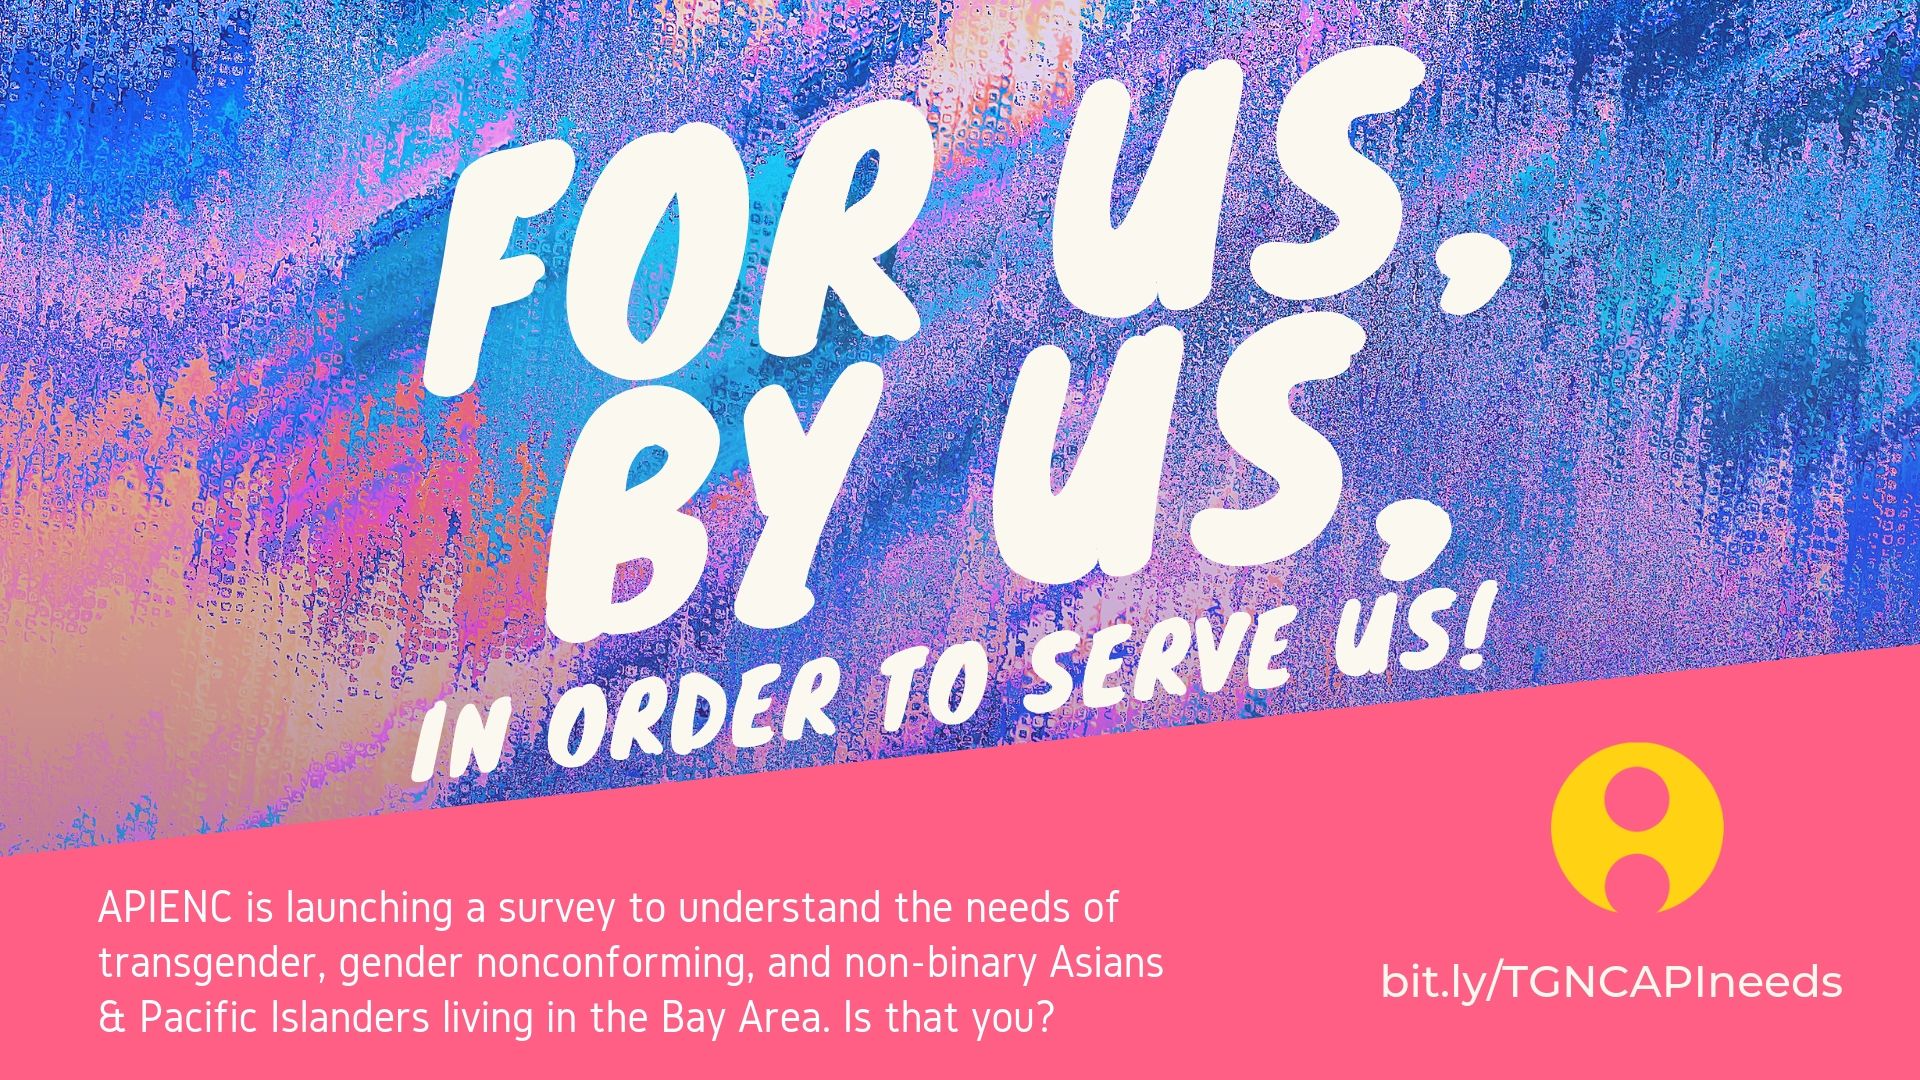 Bold white handwritten text against colorful paint stroke background that reads: "For Us, By Us, In Order To Serve Us!" Underneath, on pink background is white text that reads: "APIENC is launching a survey to understand the needs of transgender, gender nonconforming, and non-binary Asians & Pacific Islanders living in the Bay Area. Is that you?" To the right is the yellow circular APIENC logo and bit.ly/TGNCAPIneeds.